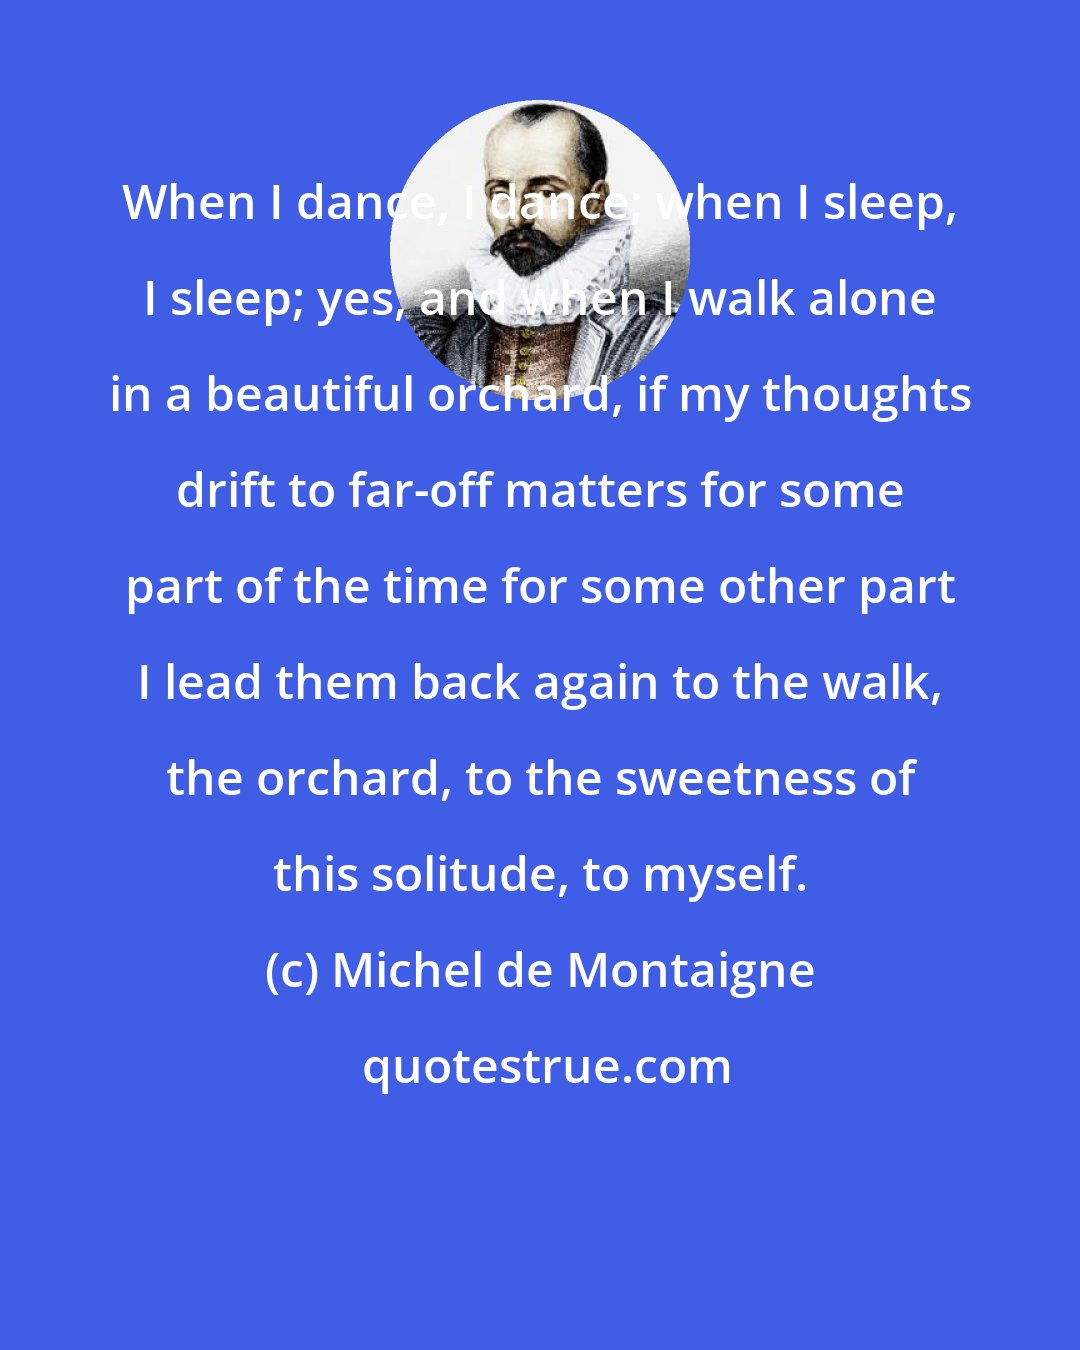 Michel de Montaigne: When I dance, I dance; when I sleep, I sleep; yes, and when I walk alone in a beautiful orchard, if my thoughts drift to far-off matters for some part of the time for some other part I lead them back again to the walk, the orchard, to the sweetness of this solitude, to myself.